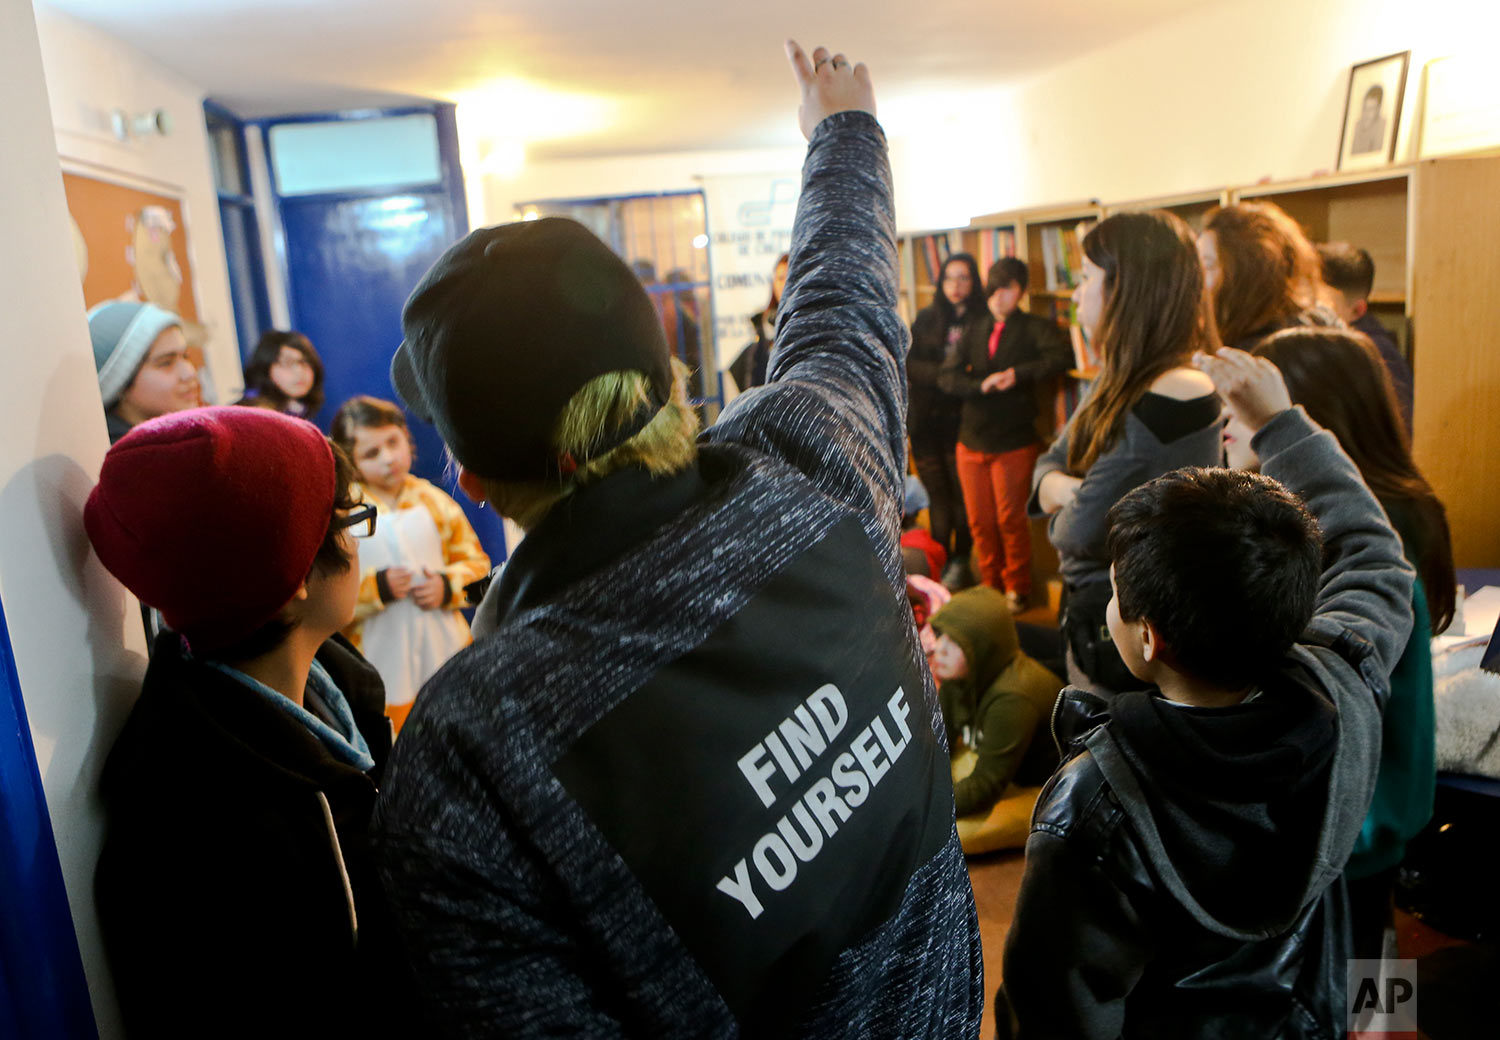  In this July 22, 2017 photo, transgender children attend a workshop on gender identity at a community center in Santiago, Chile. The Education Ministry issued a directive in May urging schools nationwide to protect the sexual orientation and gender 